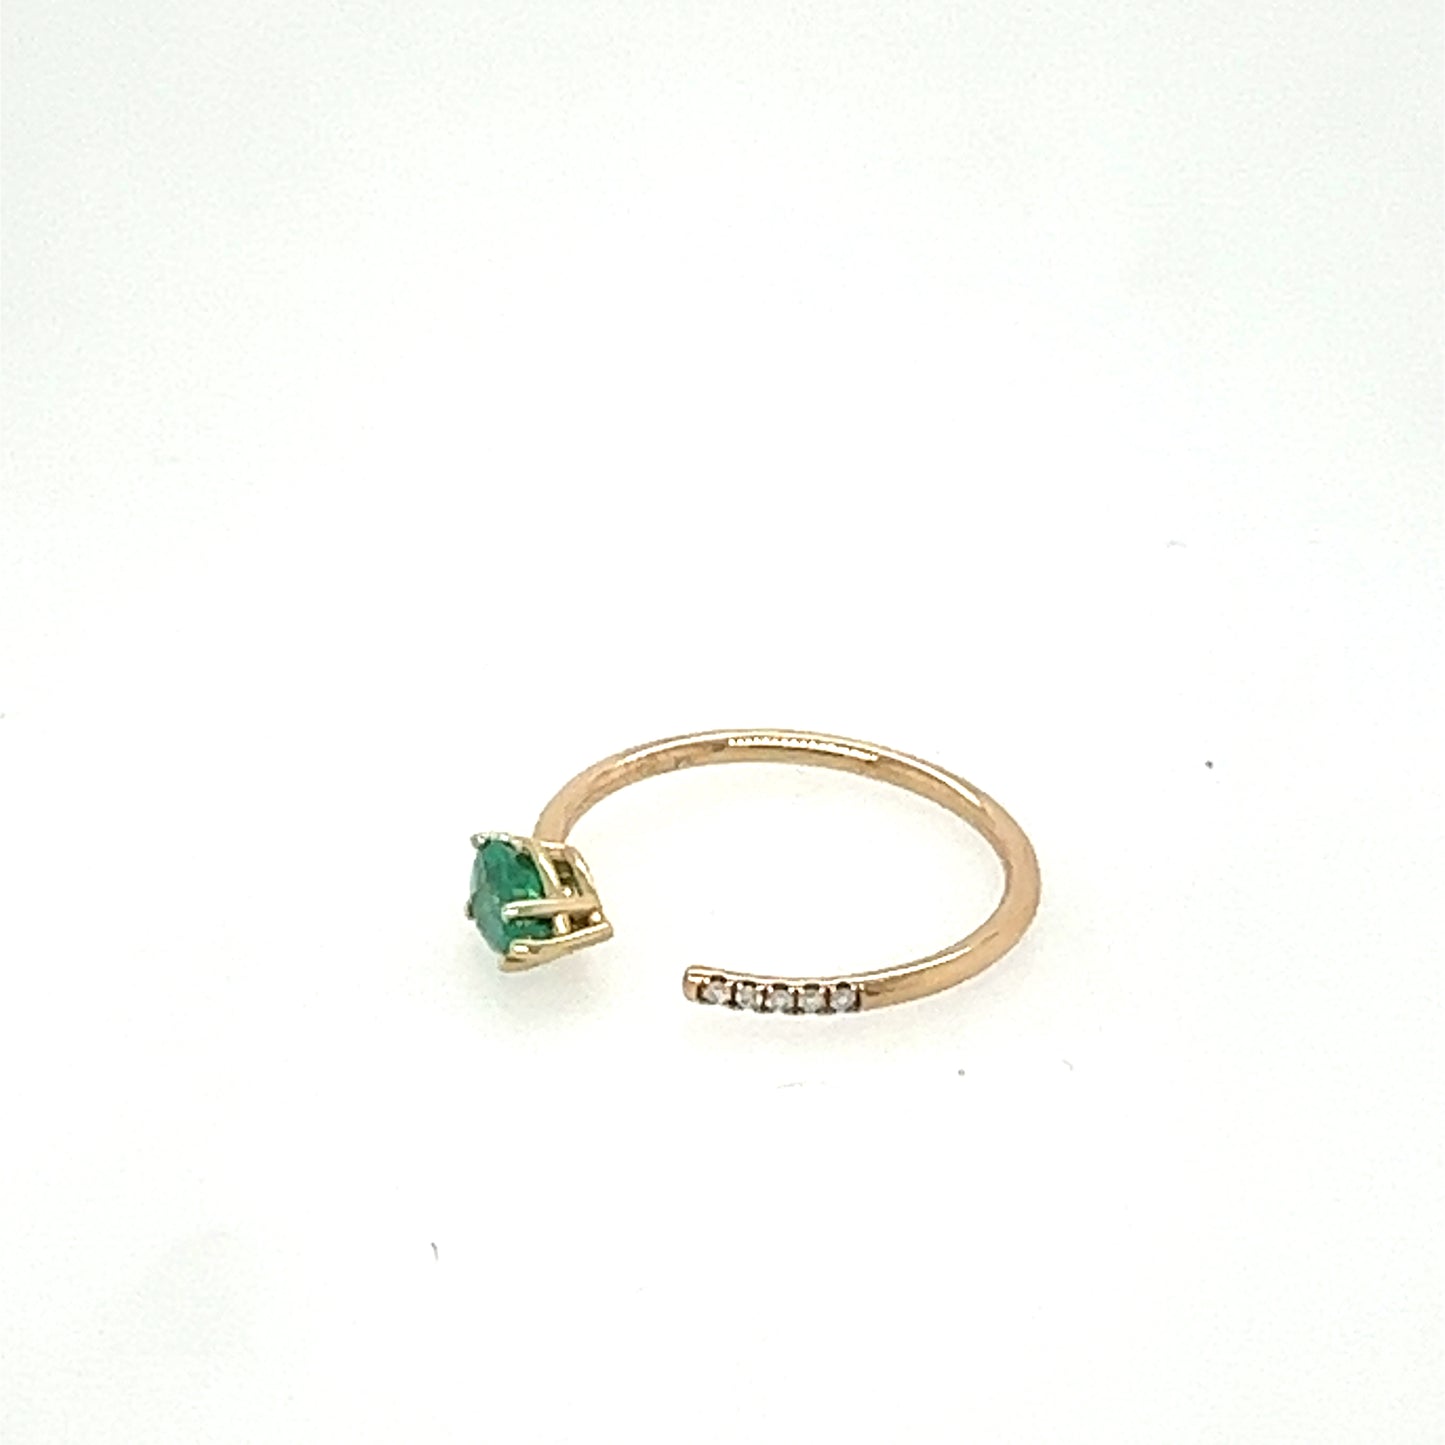 Zoë Chicco 14kt Gold, Emerald, and Diamond Open Ring